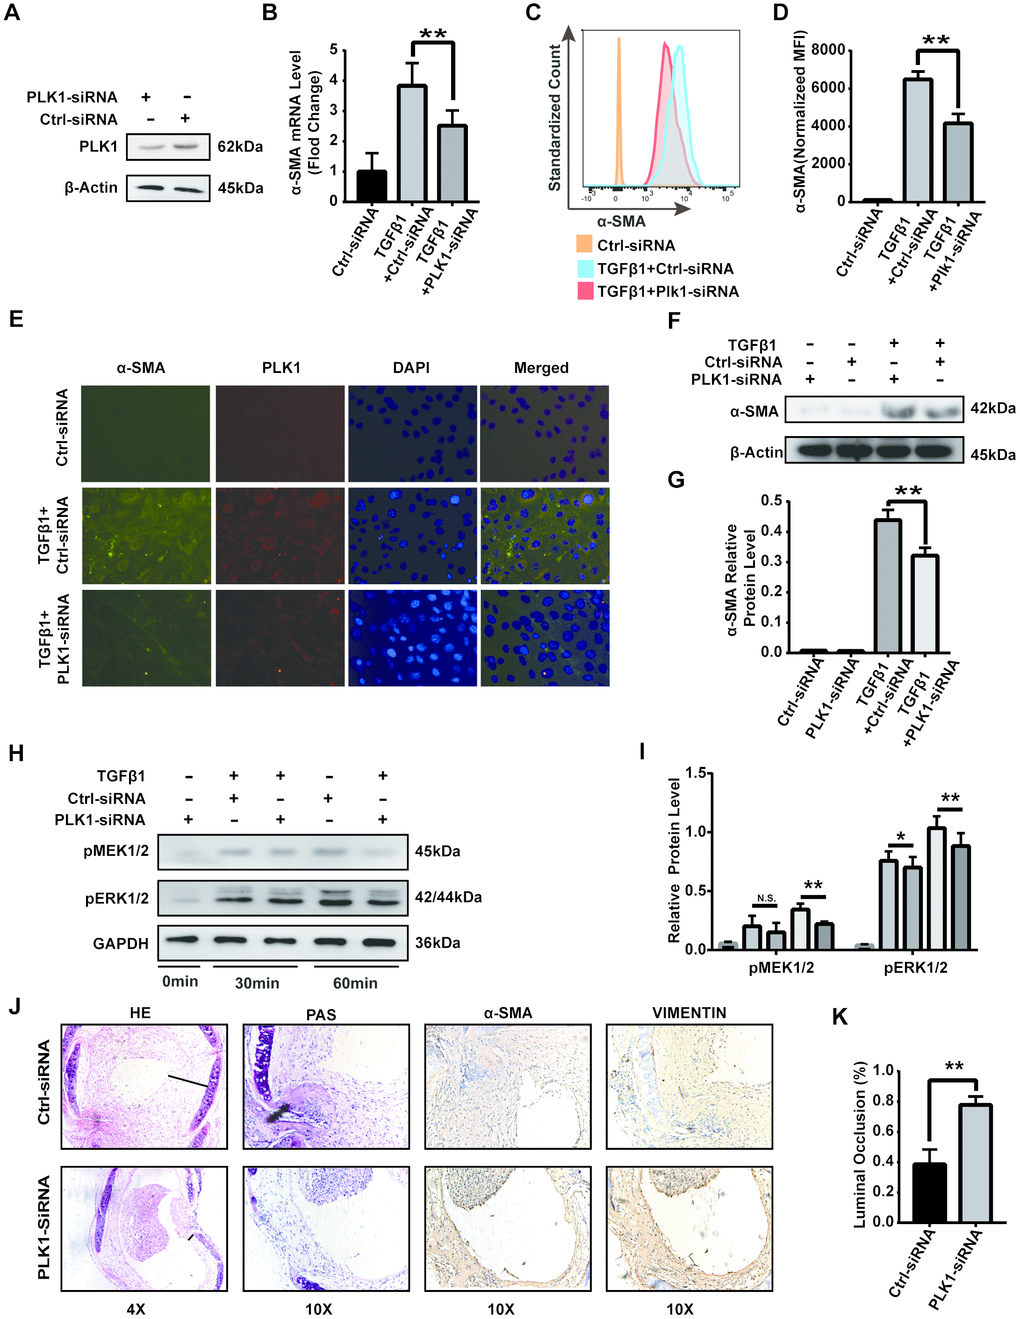 PLK1 siRNA suppresses differentiation of myofibroblasts in vitro and in vivo. (A) Protein expression of PLK1 following siRNA transfection. (B) The mRNA expression of α-SMA following PLK1 siRNA transfection. (C, D) The expression of α-SMA was measured by FCM; quantification by MFI analysis is shown in the bar diagram. (E) The expression of α-SMA was analyzed by IF. (F, G) The expression of α-SMA was analyzed by WB. (H, I) Representative immunoblots for MEK, phosphorylated ERK, and GAPDH at various timepoints are shown. (J) Representative immunohistochemical stains of PLK1 siRNA-treated or control tracheal grafts 28 days post-transplantation. (K) Percentage of luminal occlusion in the PLK1 siRNA-treated and control groups 28 days after transplantation.